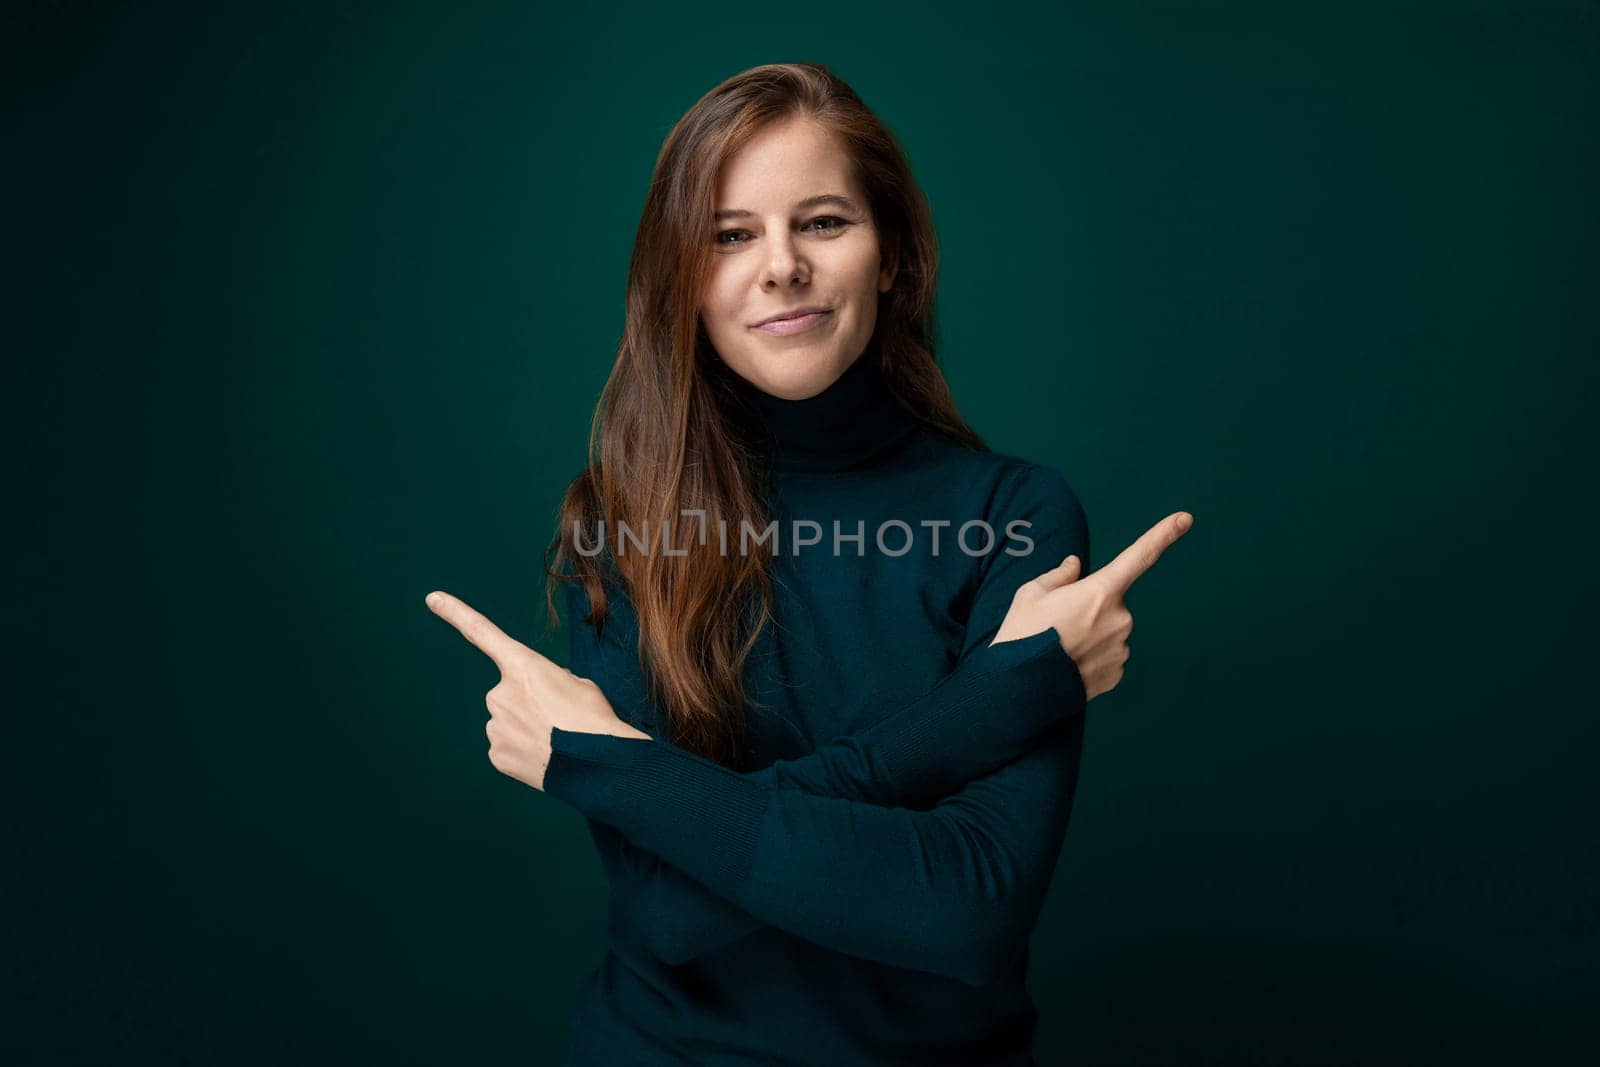 Portrait of a charismatic young woman with brown eyes wearing a green turtleneck by TRMK